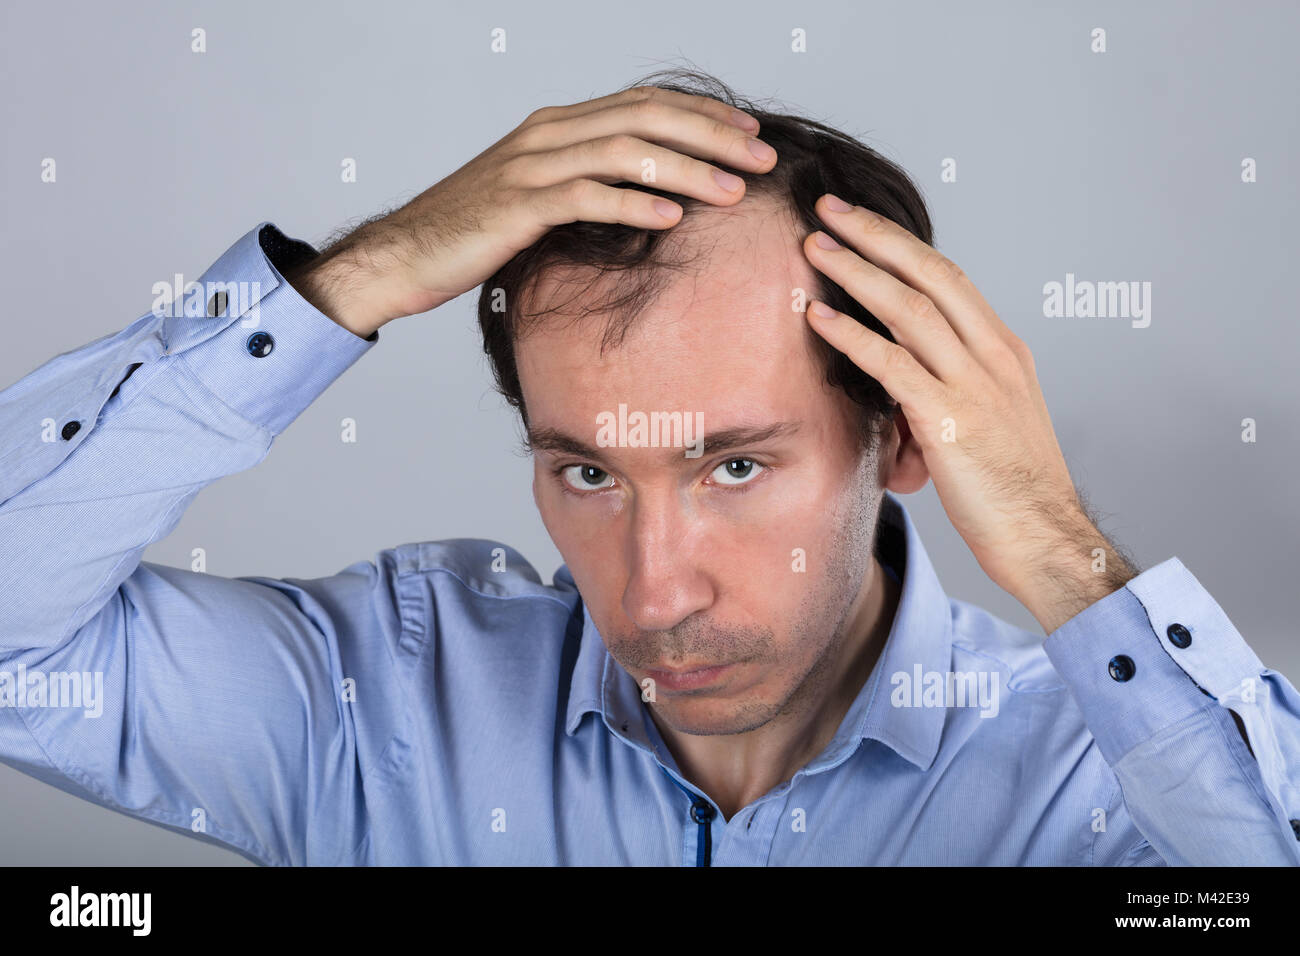 Man Suffering From Hair Loss Against Grey Background Stock Photo